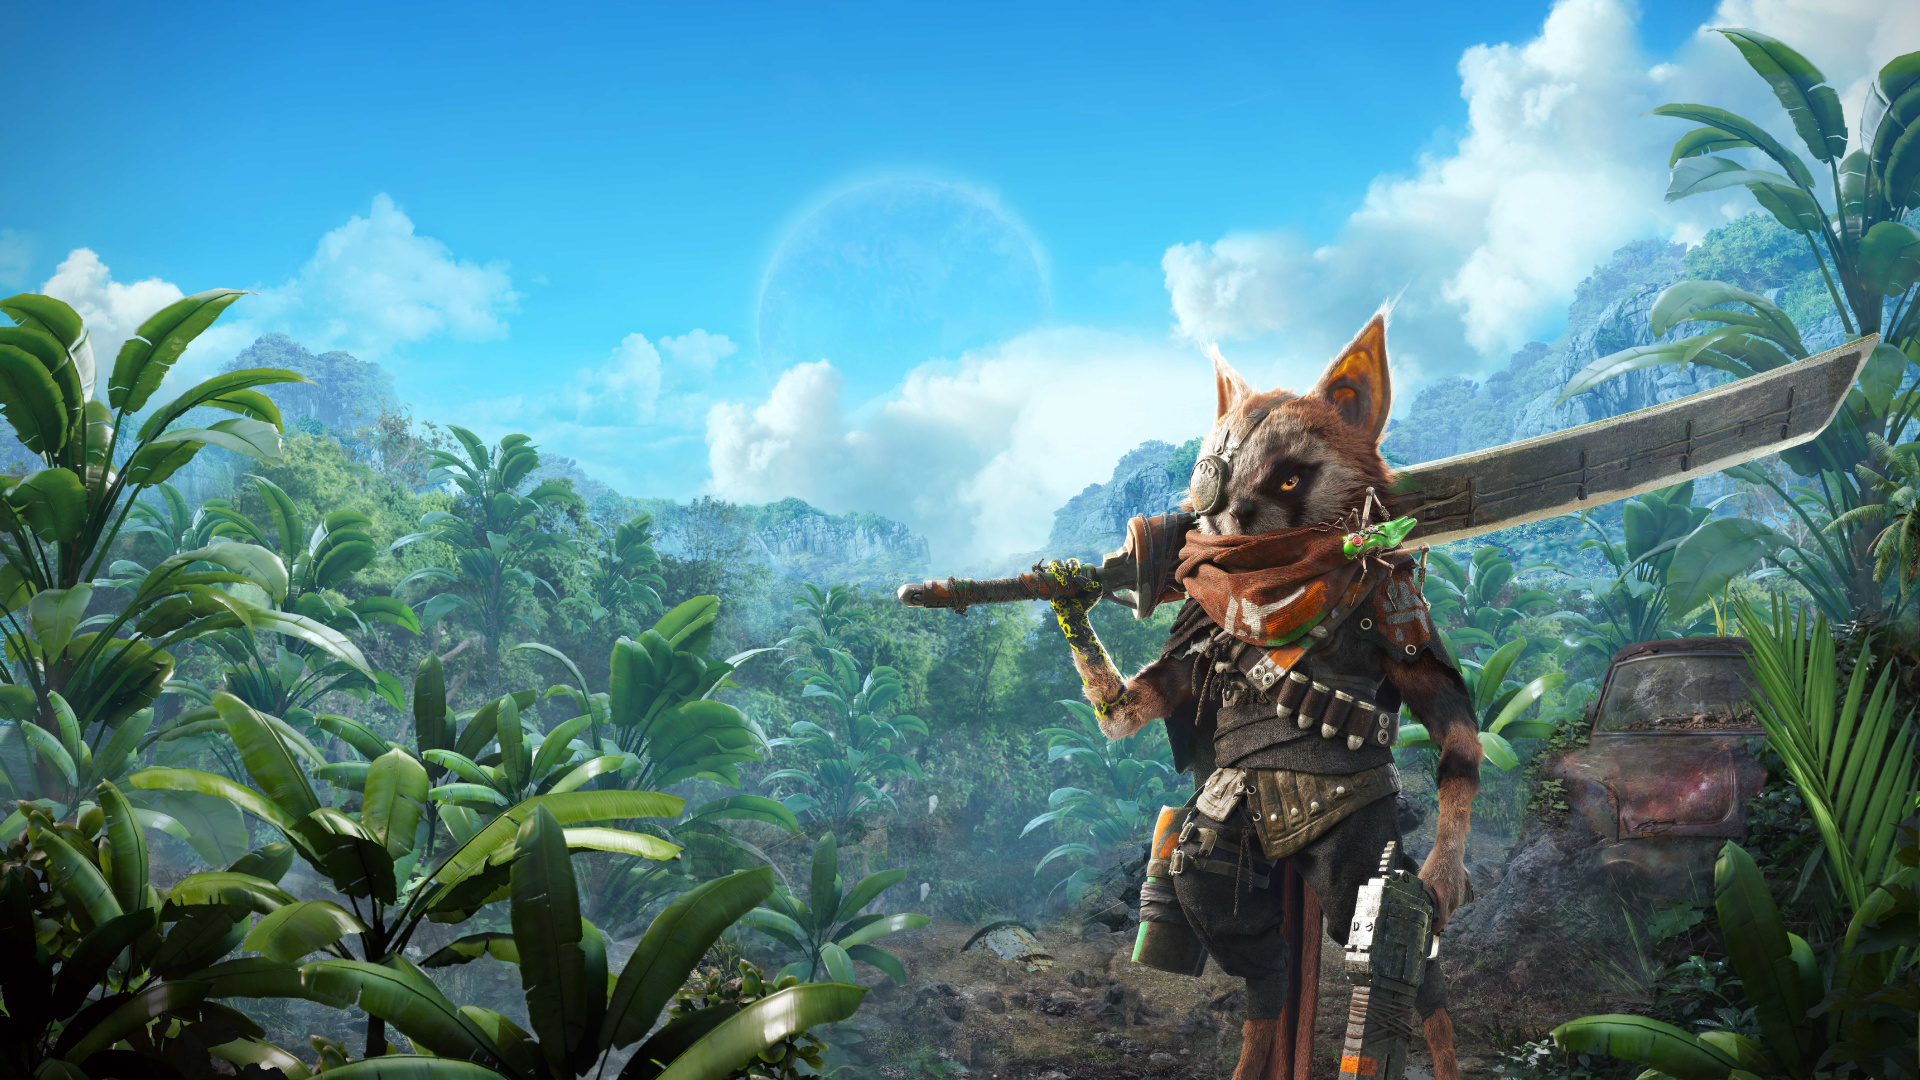 Biomutant, Xbox One, pc Game, Adventure Game, Jungle. Wallpaper in 1920x1080 Resolution